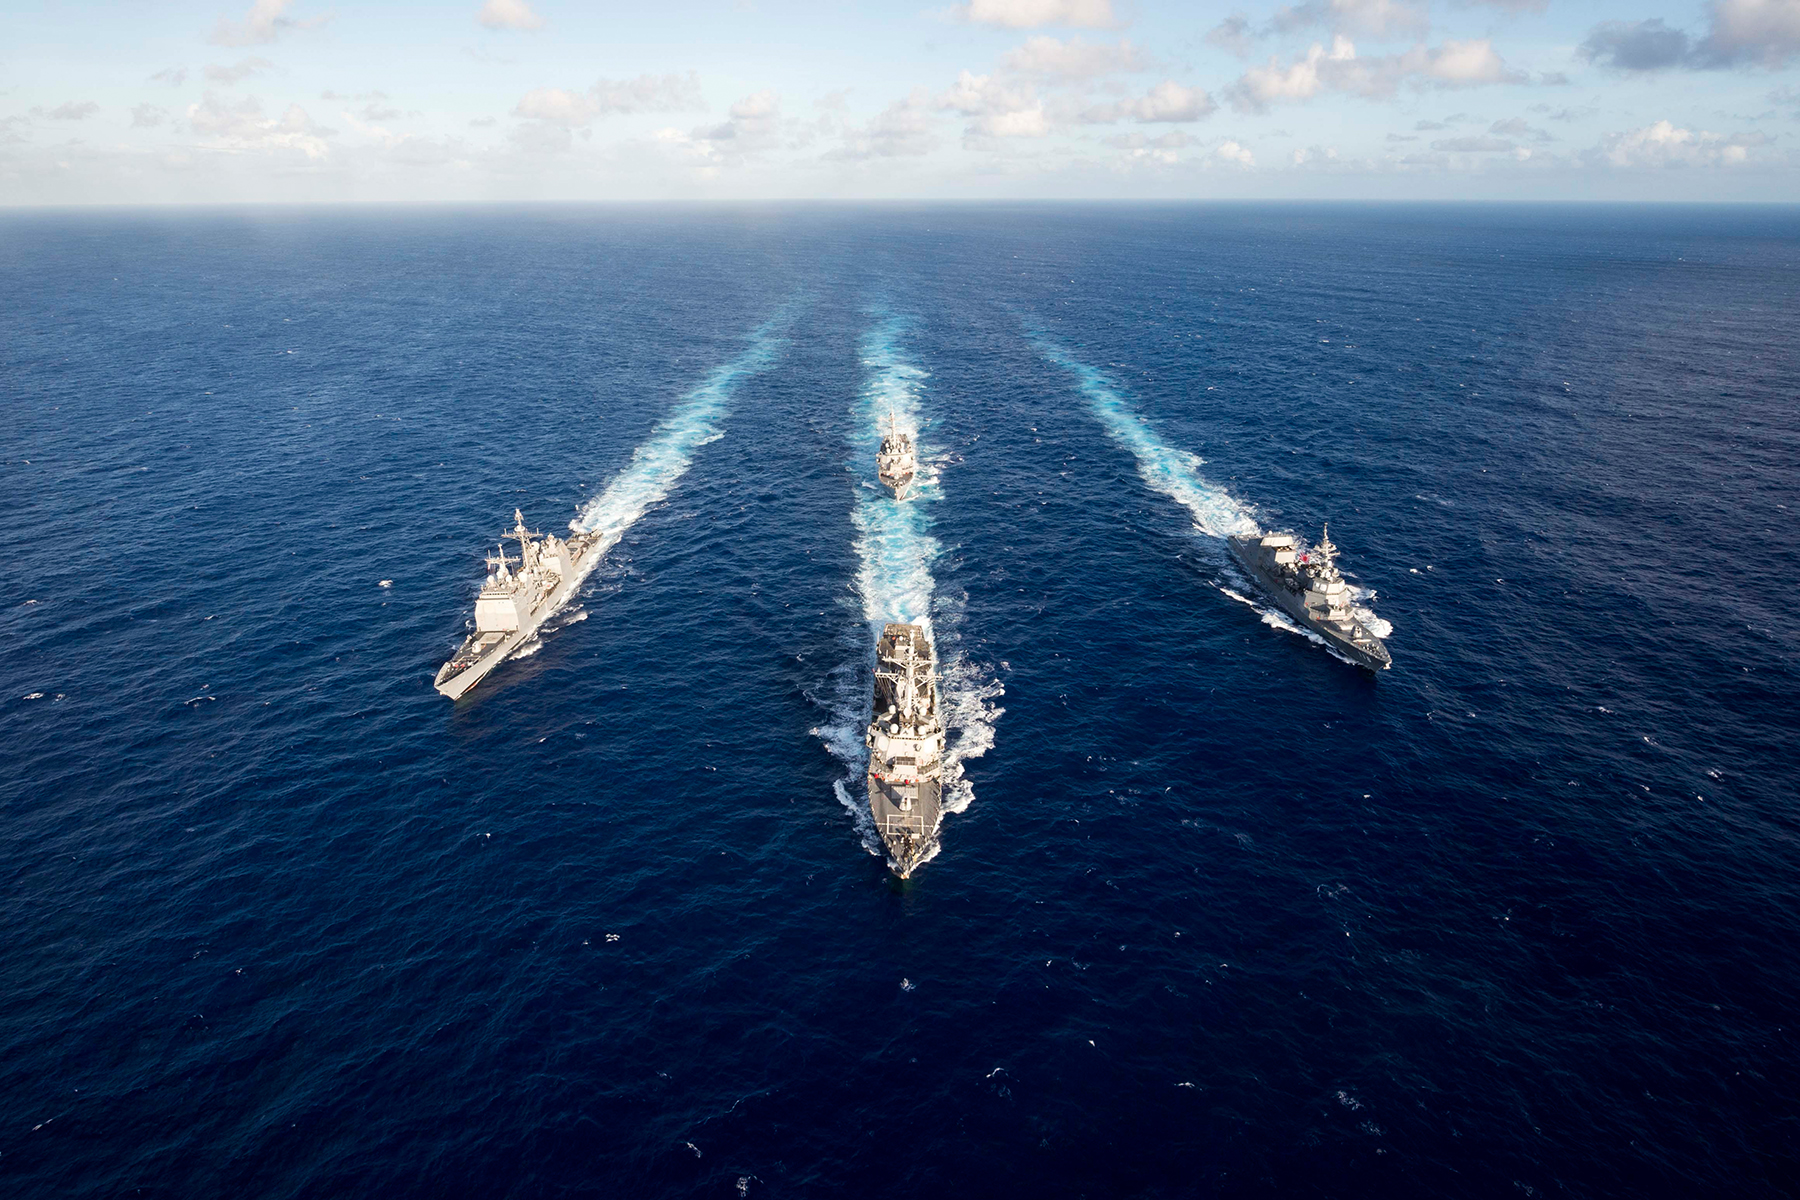 The guided missile destroyer USS Mustin leads the guided missile cruiser USS Antietam, the guided missile destroyer USS Curtis Wilbur and the Japan Maritime Self-Defense Force destroyer JS Fuyuzuki in a formation at the completion of the MultiSail 2018 exercise in the Philippine Sea, March 14, 2018. MultiSail is a bilateral training exercise improving interoperability between the U.S. and Japanese forces. Navy photo by Petty Officer 3rd Class Sarah Myers -